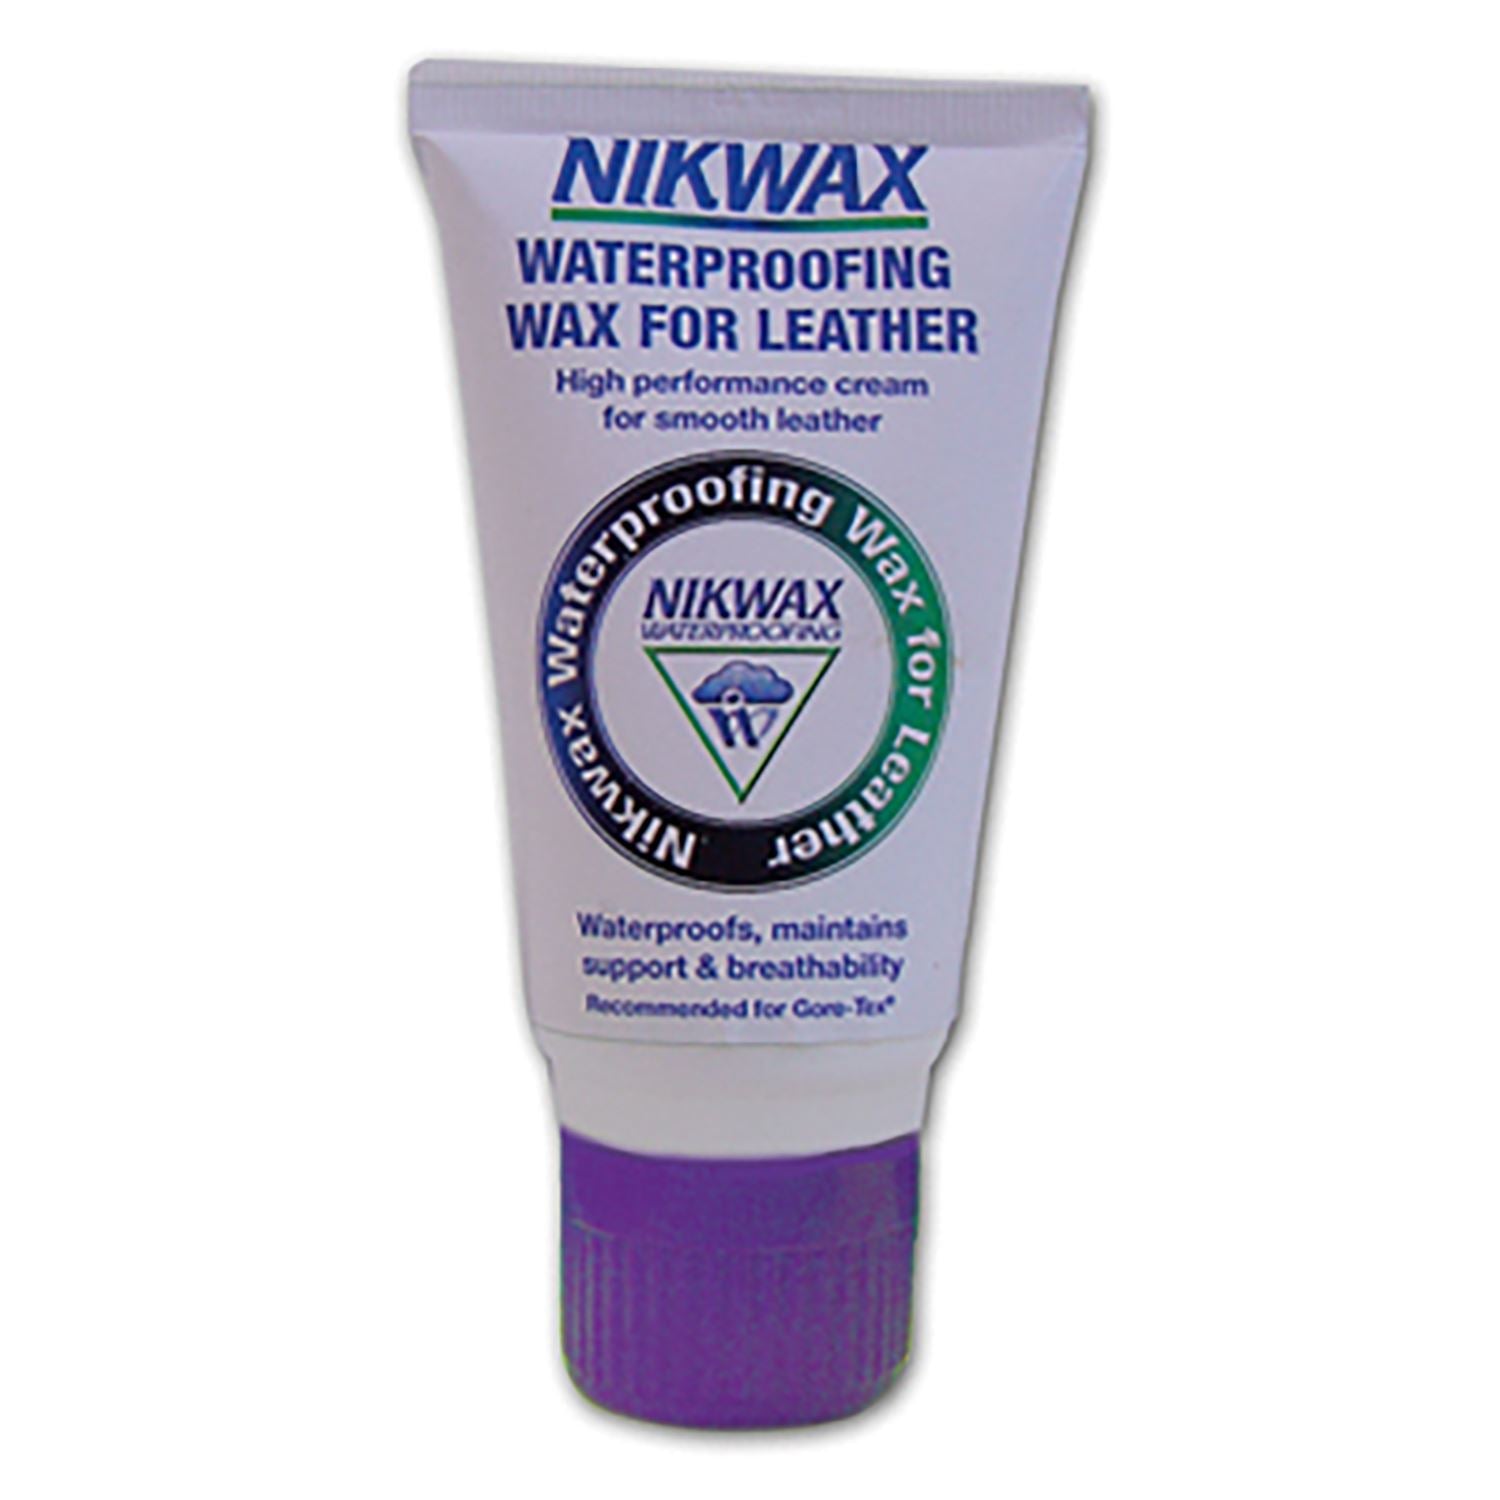 Nikwax Waterproofing Wax Cream For Leather - Just Horse Riders